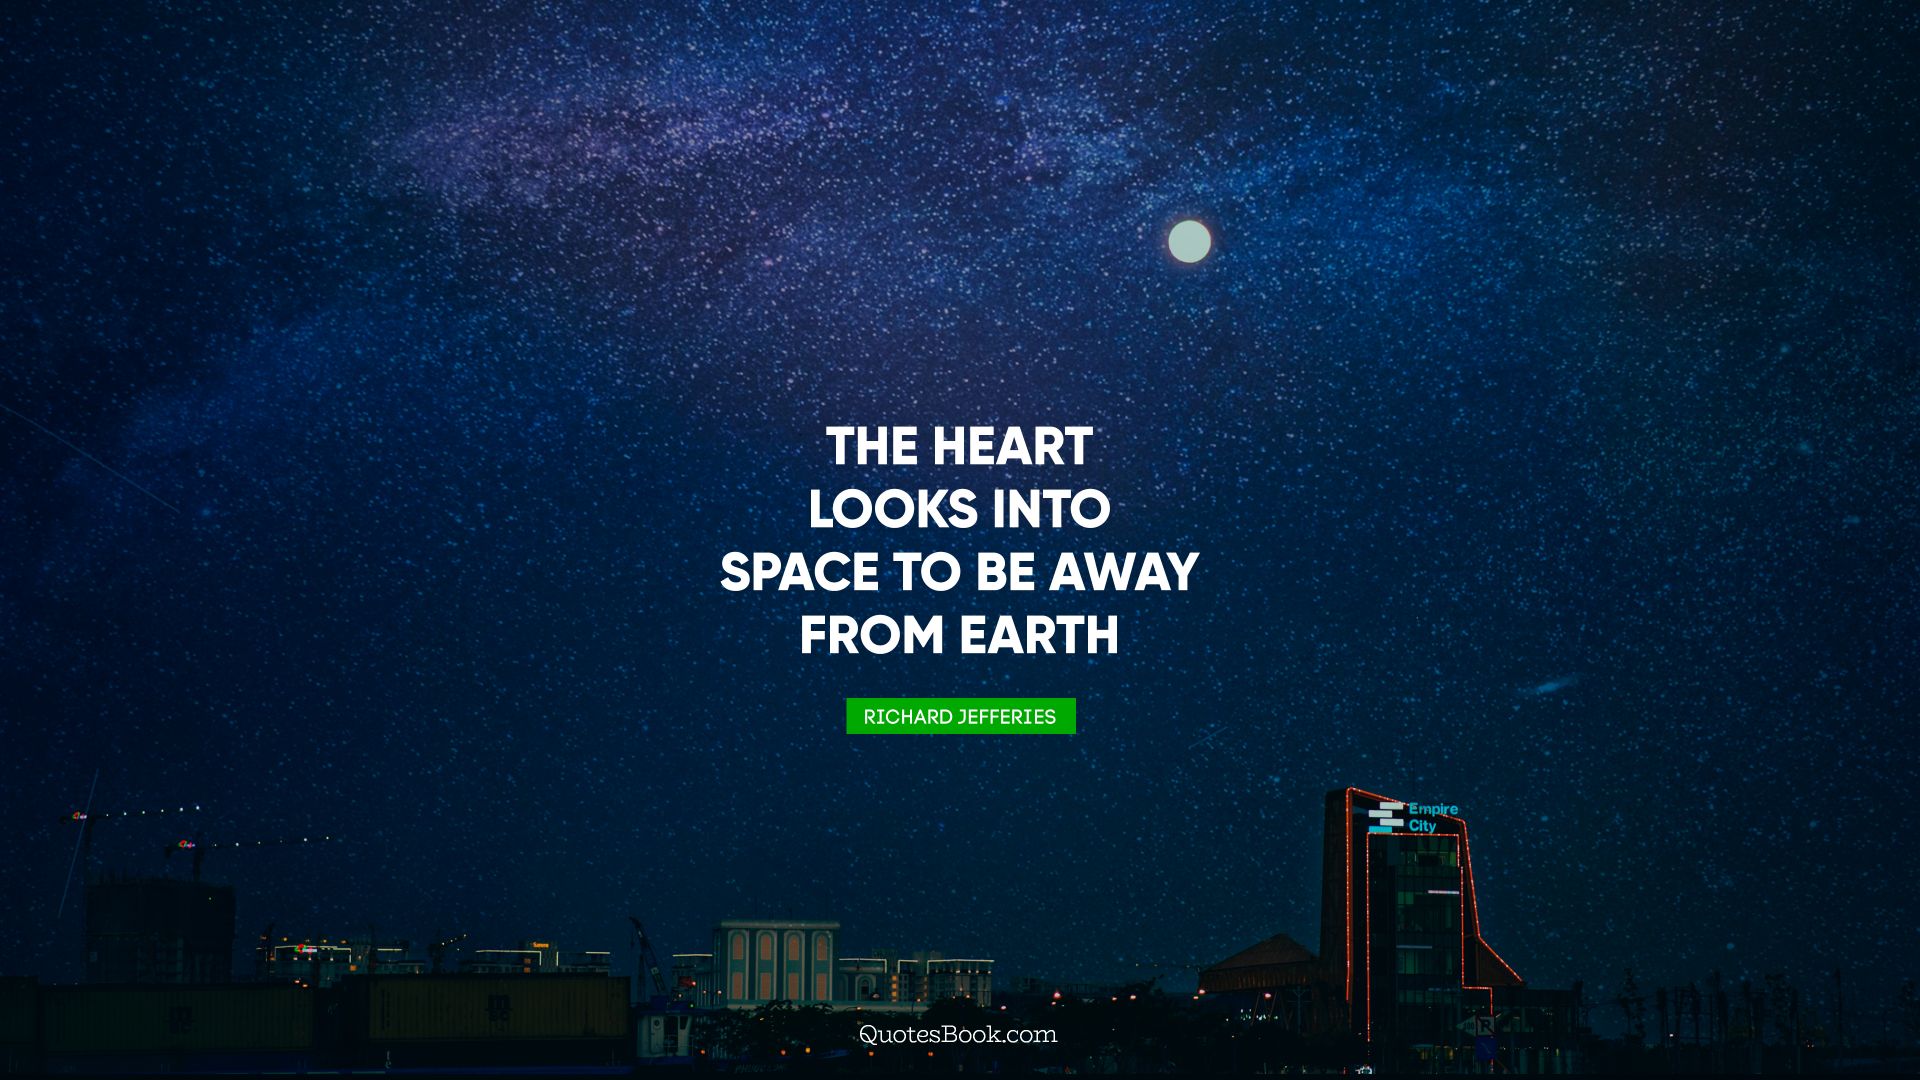 The heart looks into space to be away from earth. - Quote by Richard Jefferies